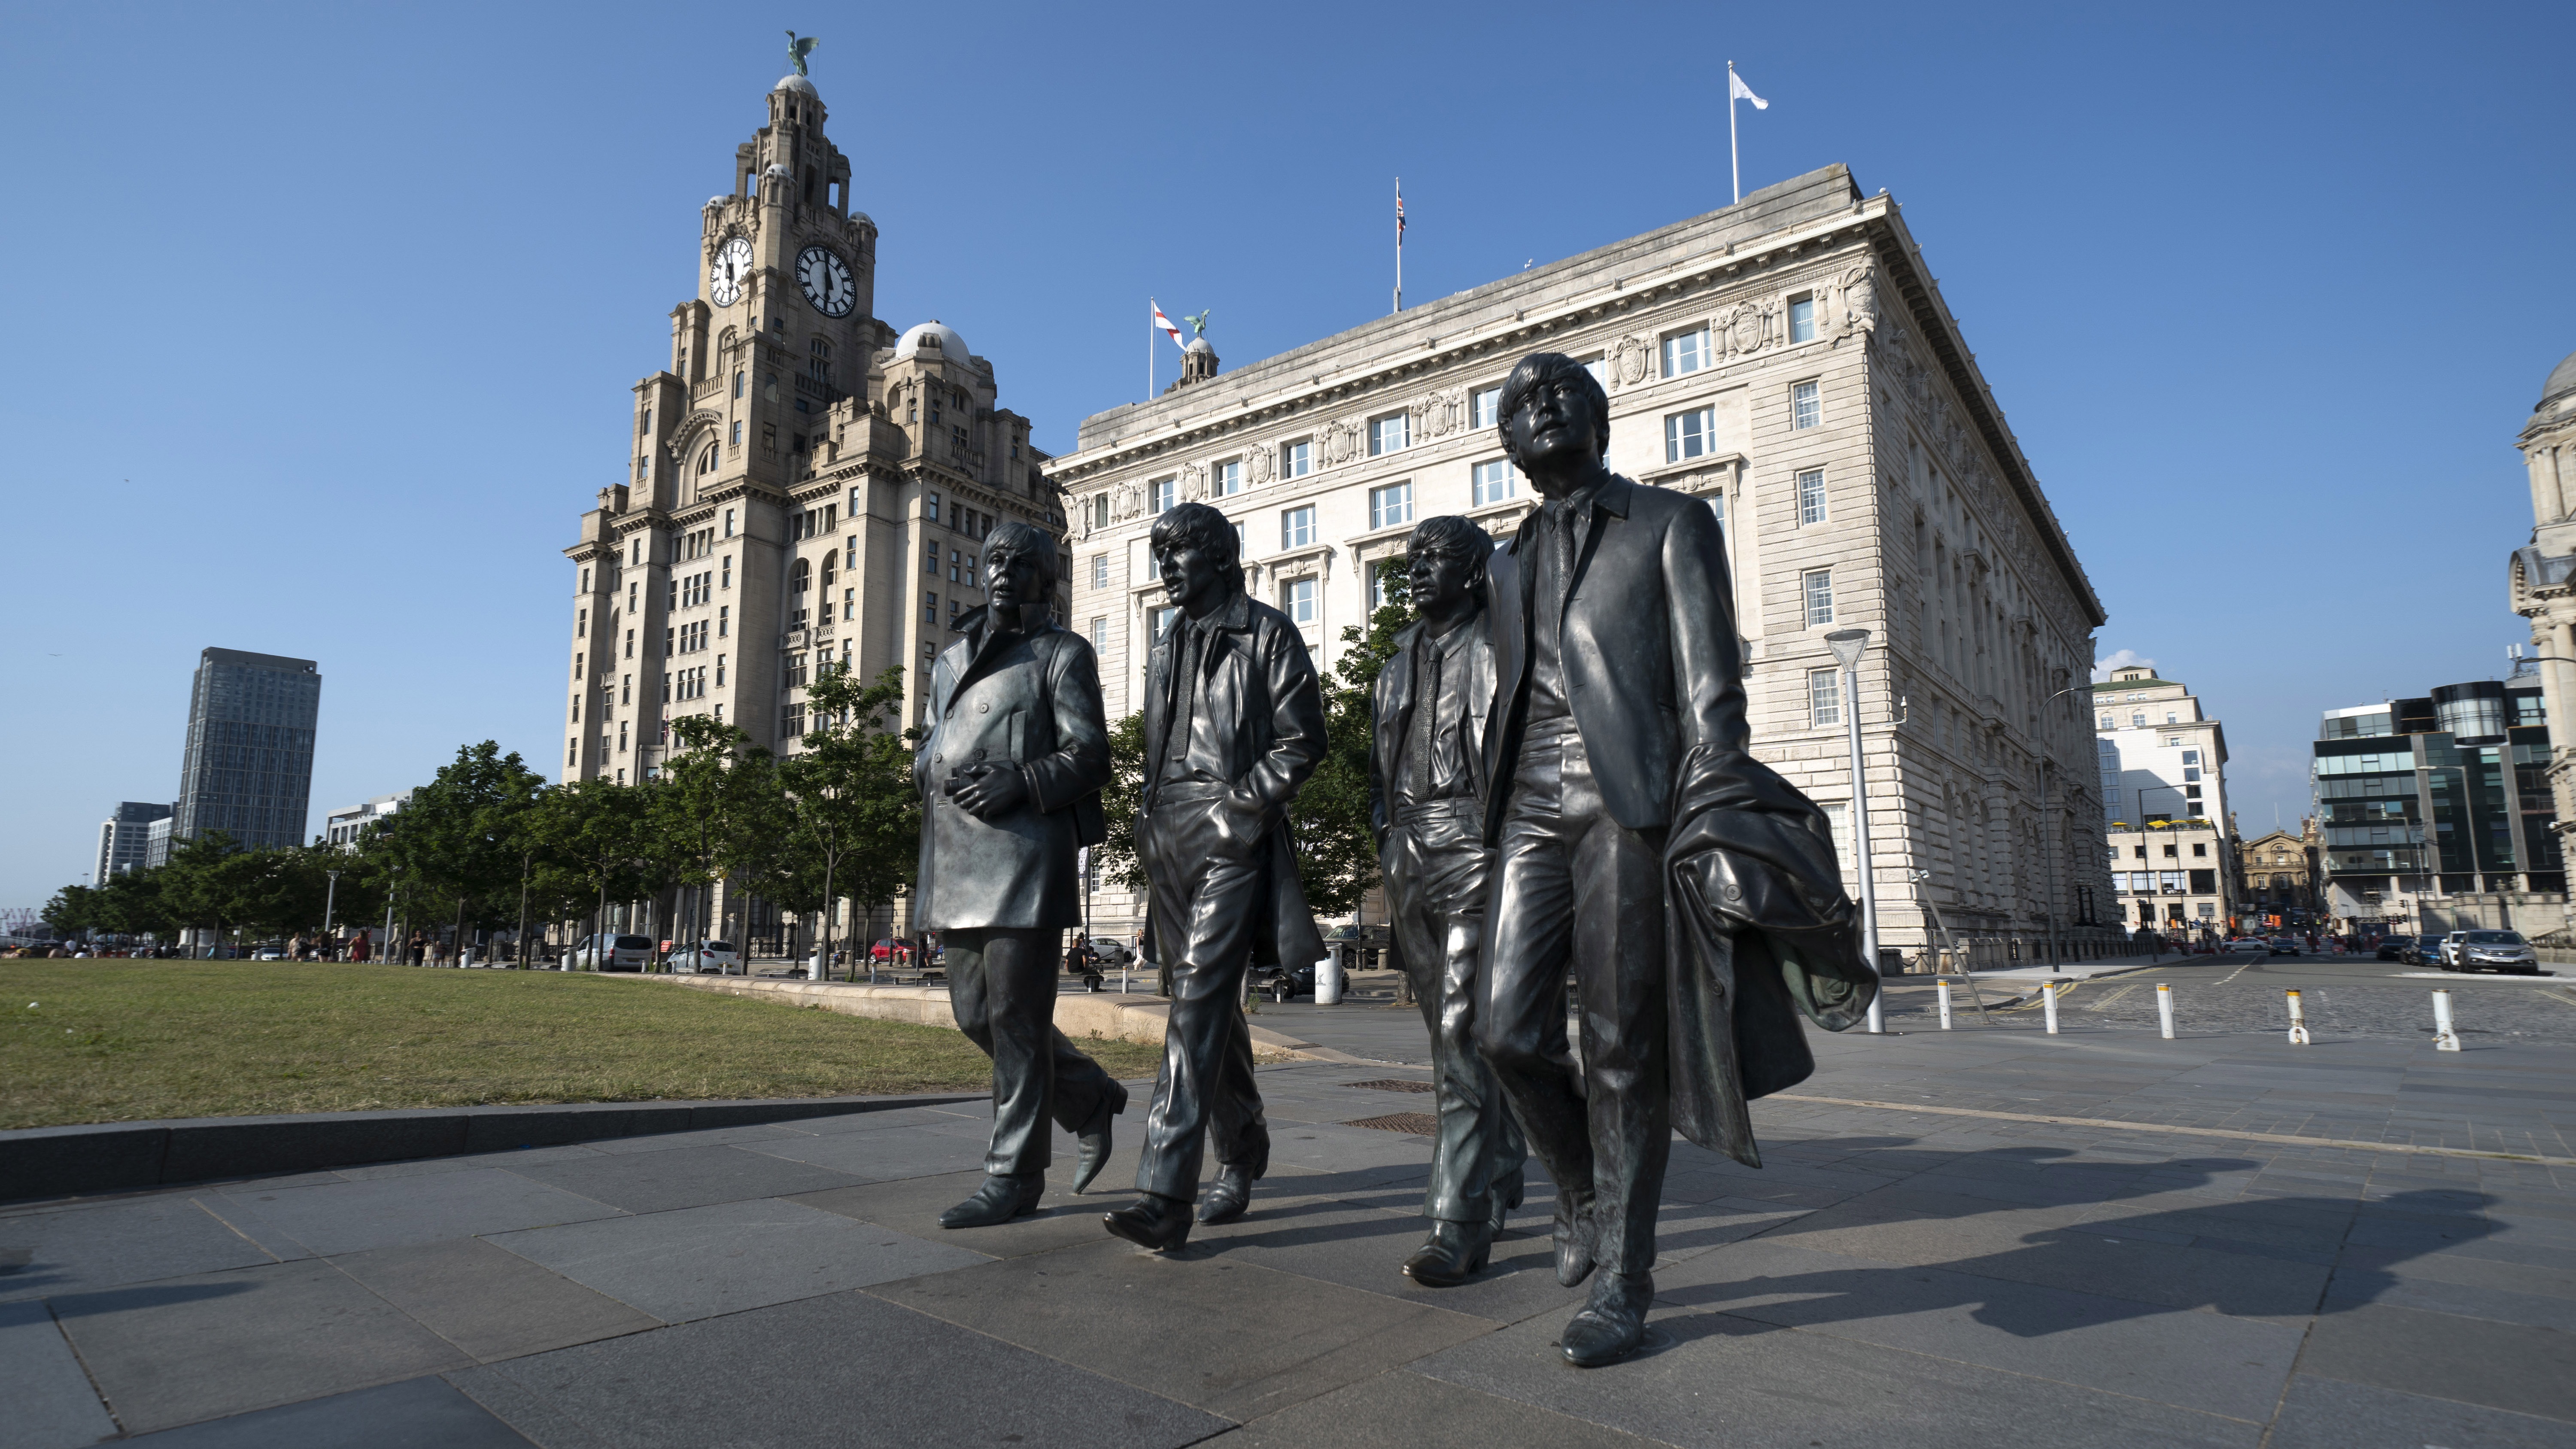 The Beatles: Is it time Liverpool left the Fab Four in the past